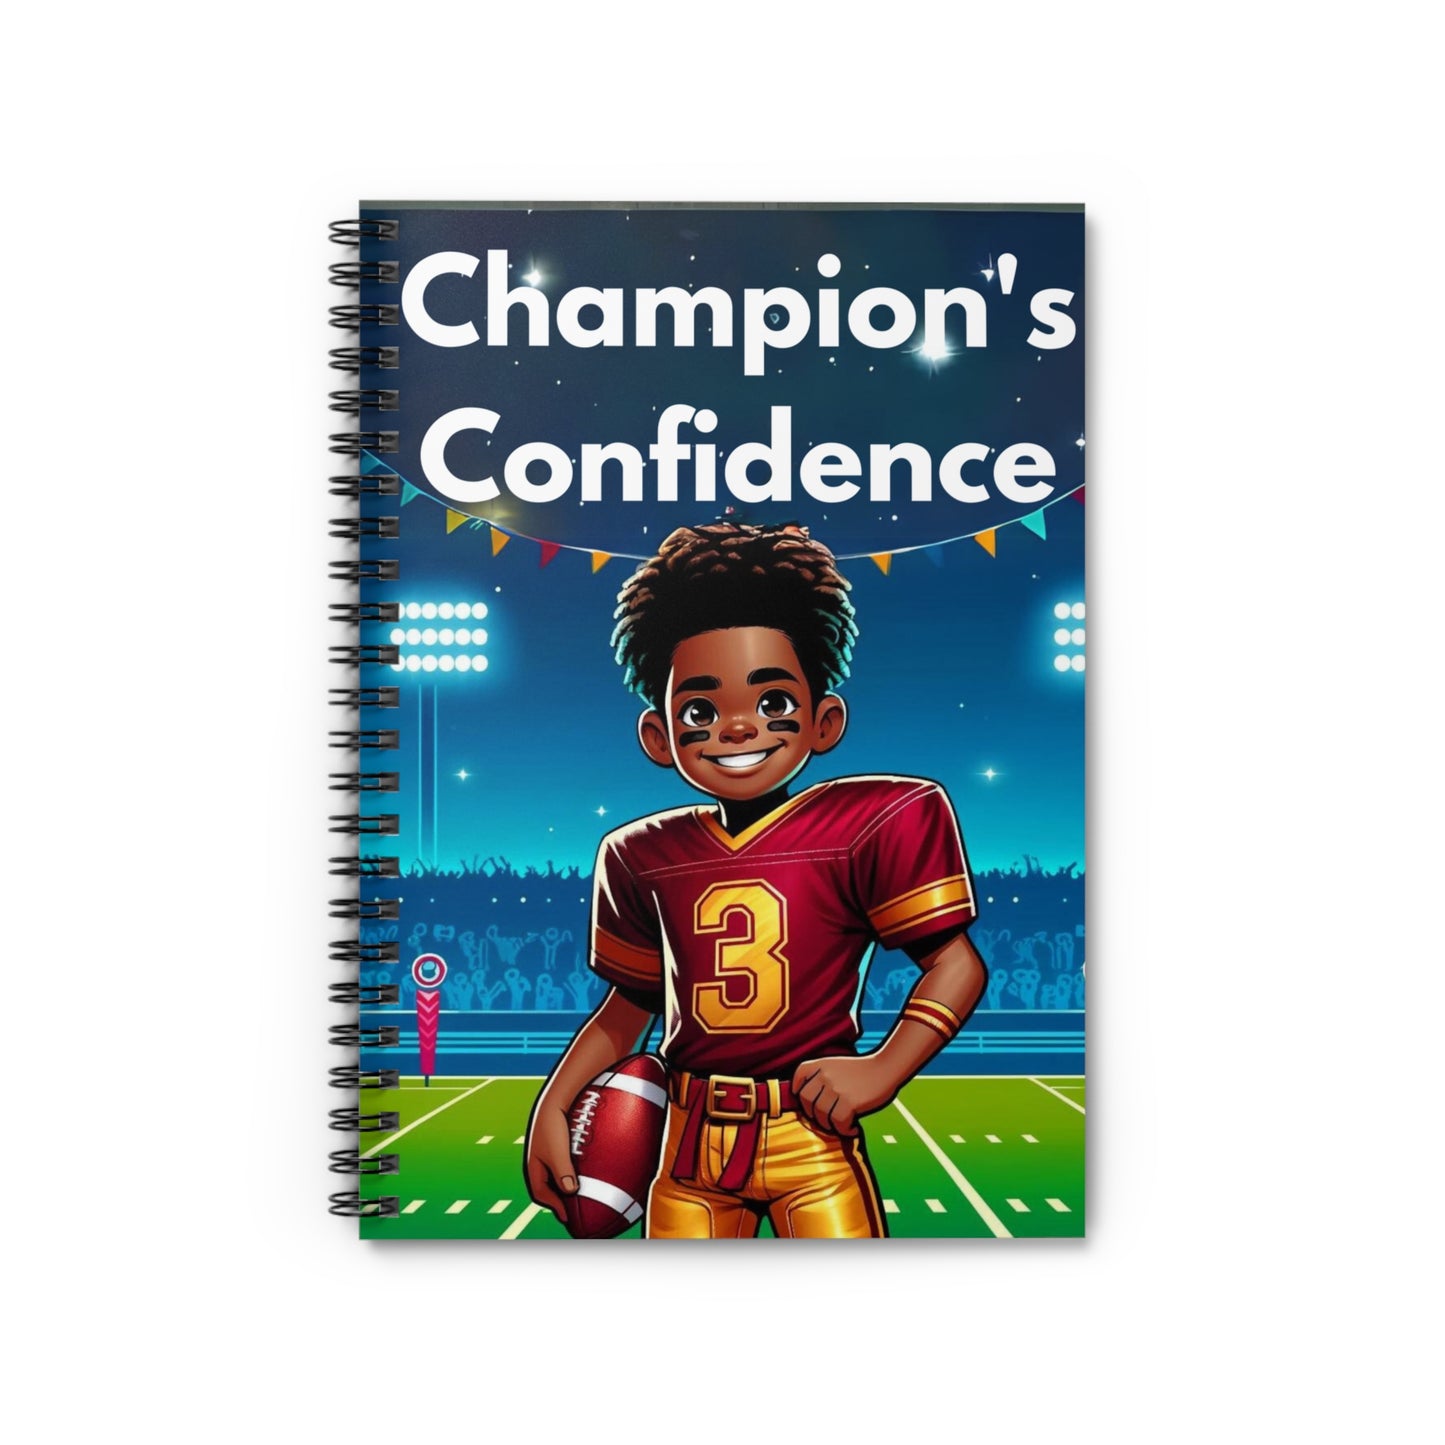 Champion's Confidence Spiral Notebook - Ruled Line, Joyous LifeJournals